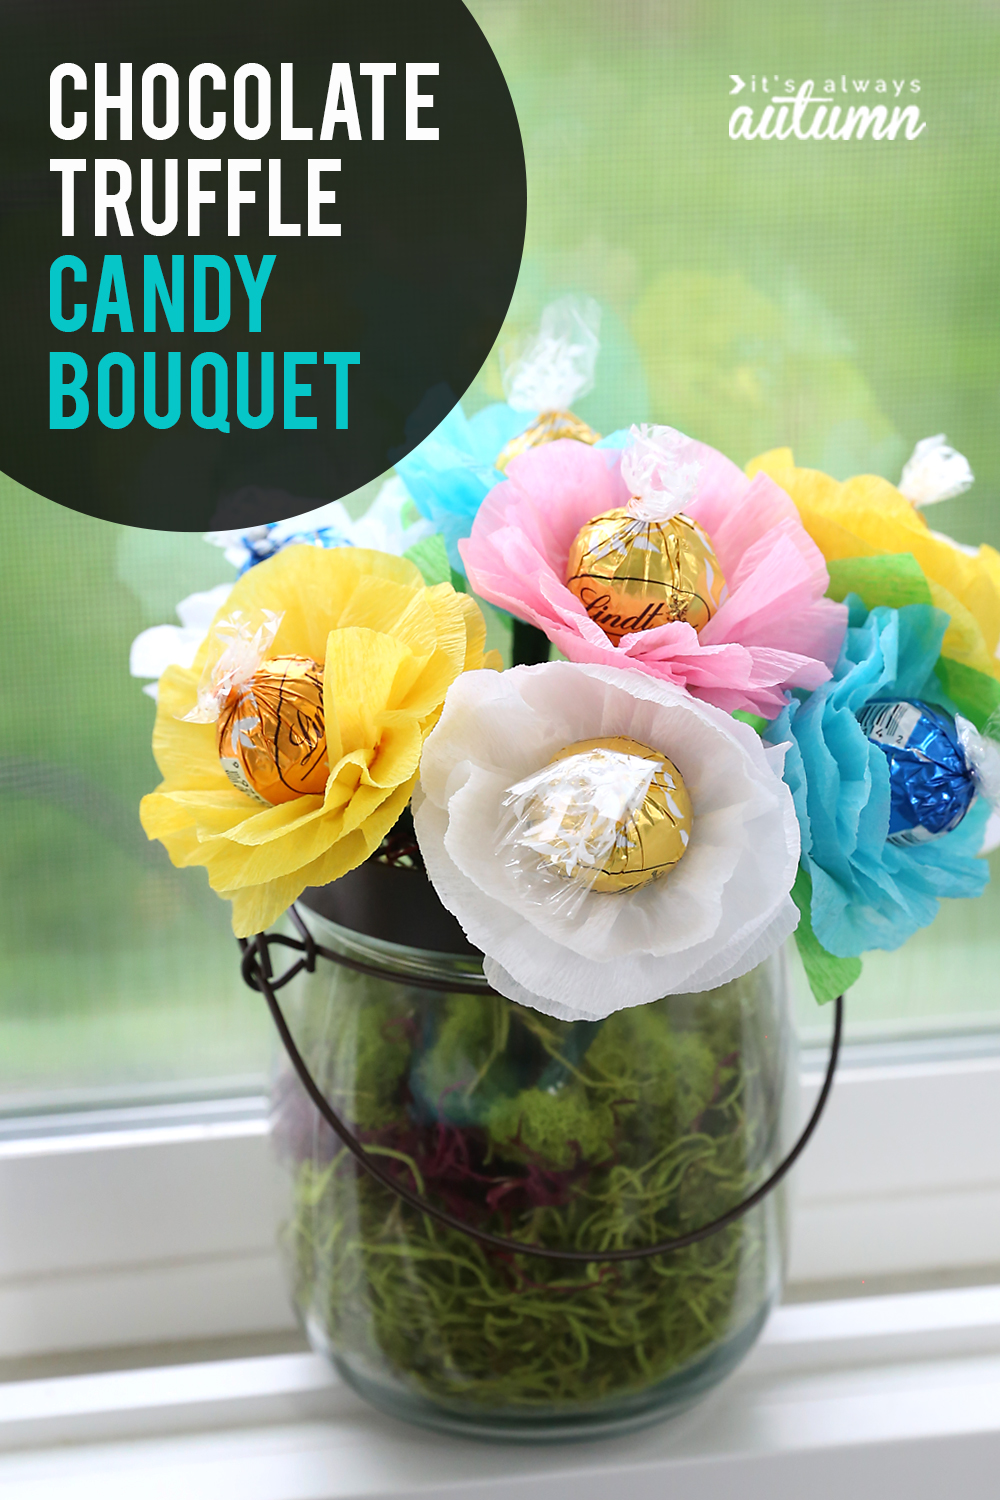 Paper Flowers With Chocolate Centers - Make